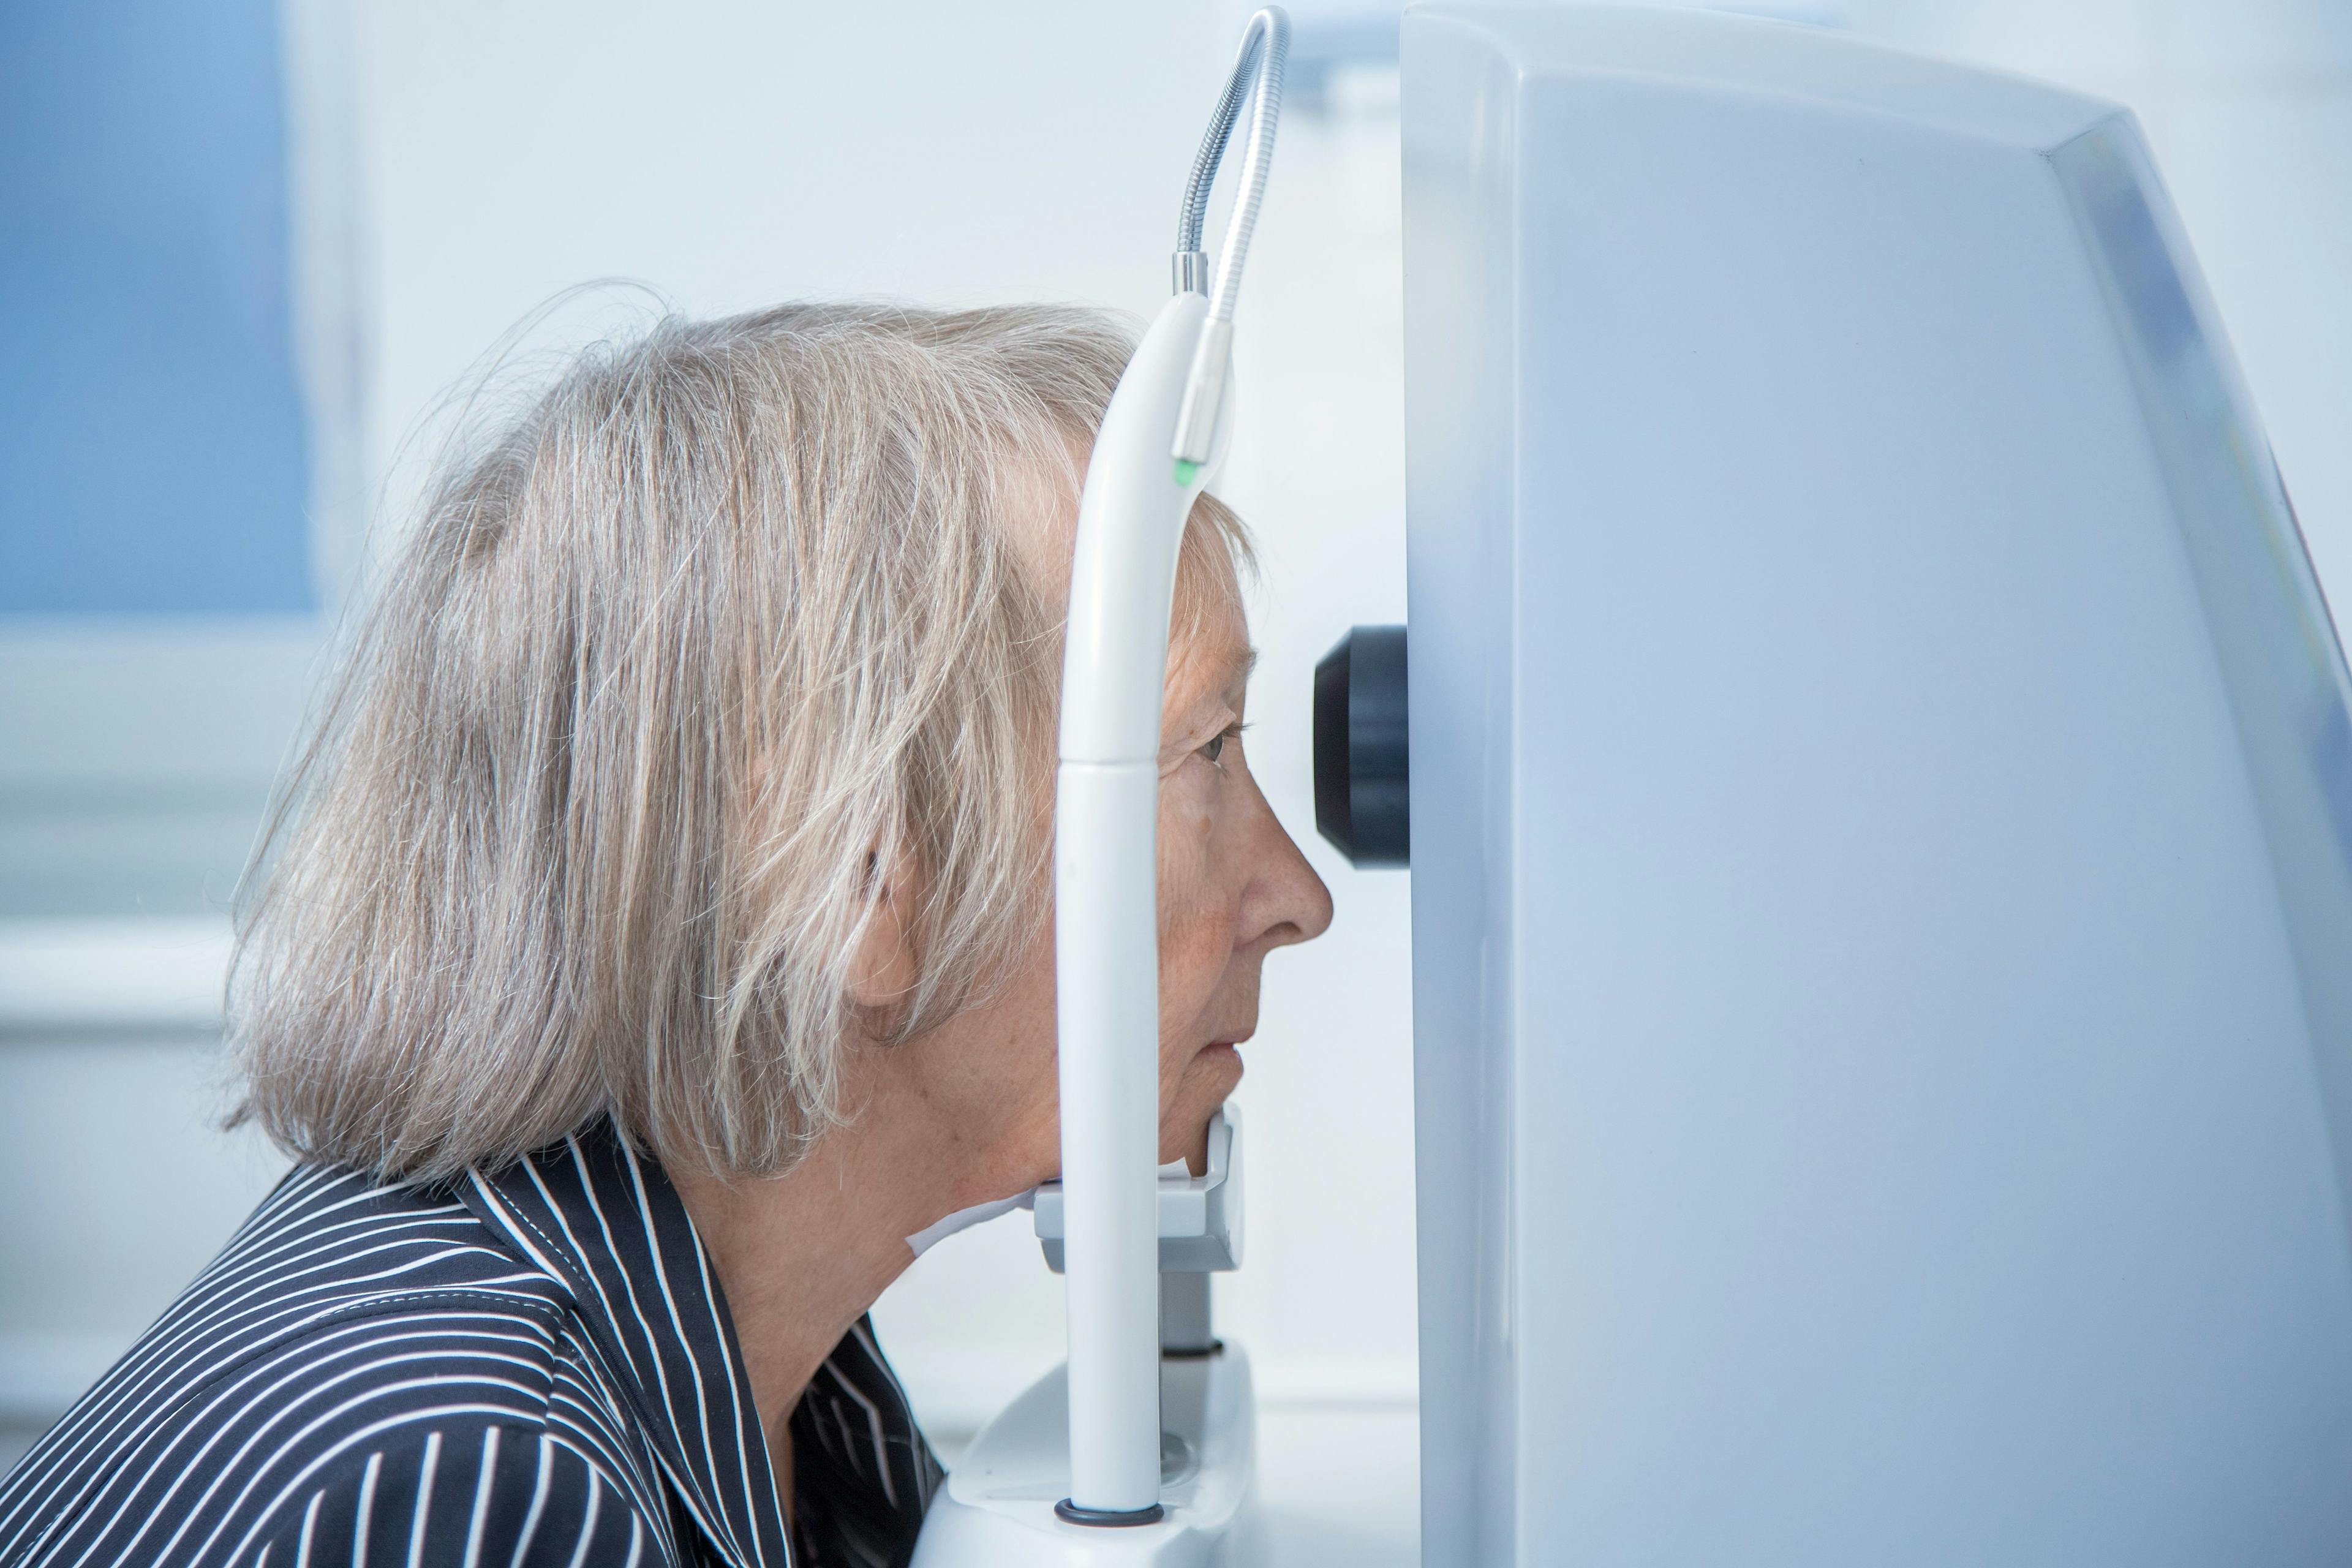  Licensed   FILE #:  536976248  Preview Crop  Find Similar DIMENSIONS 5760 x 3840px FILE TYPE JPEG CATEGORY People LICENSE TYPE Standard or Extended an elderly woman on a computer tomograph does a retinal tomography in the oculist's office. Image Credit: Adobe Stock Images/Olga